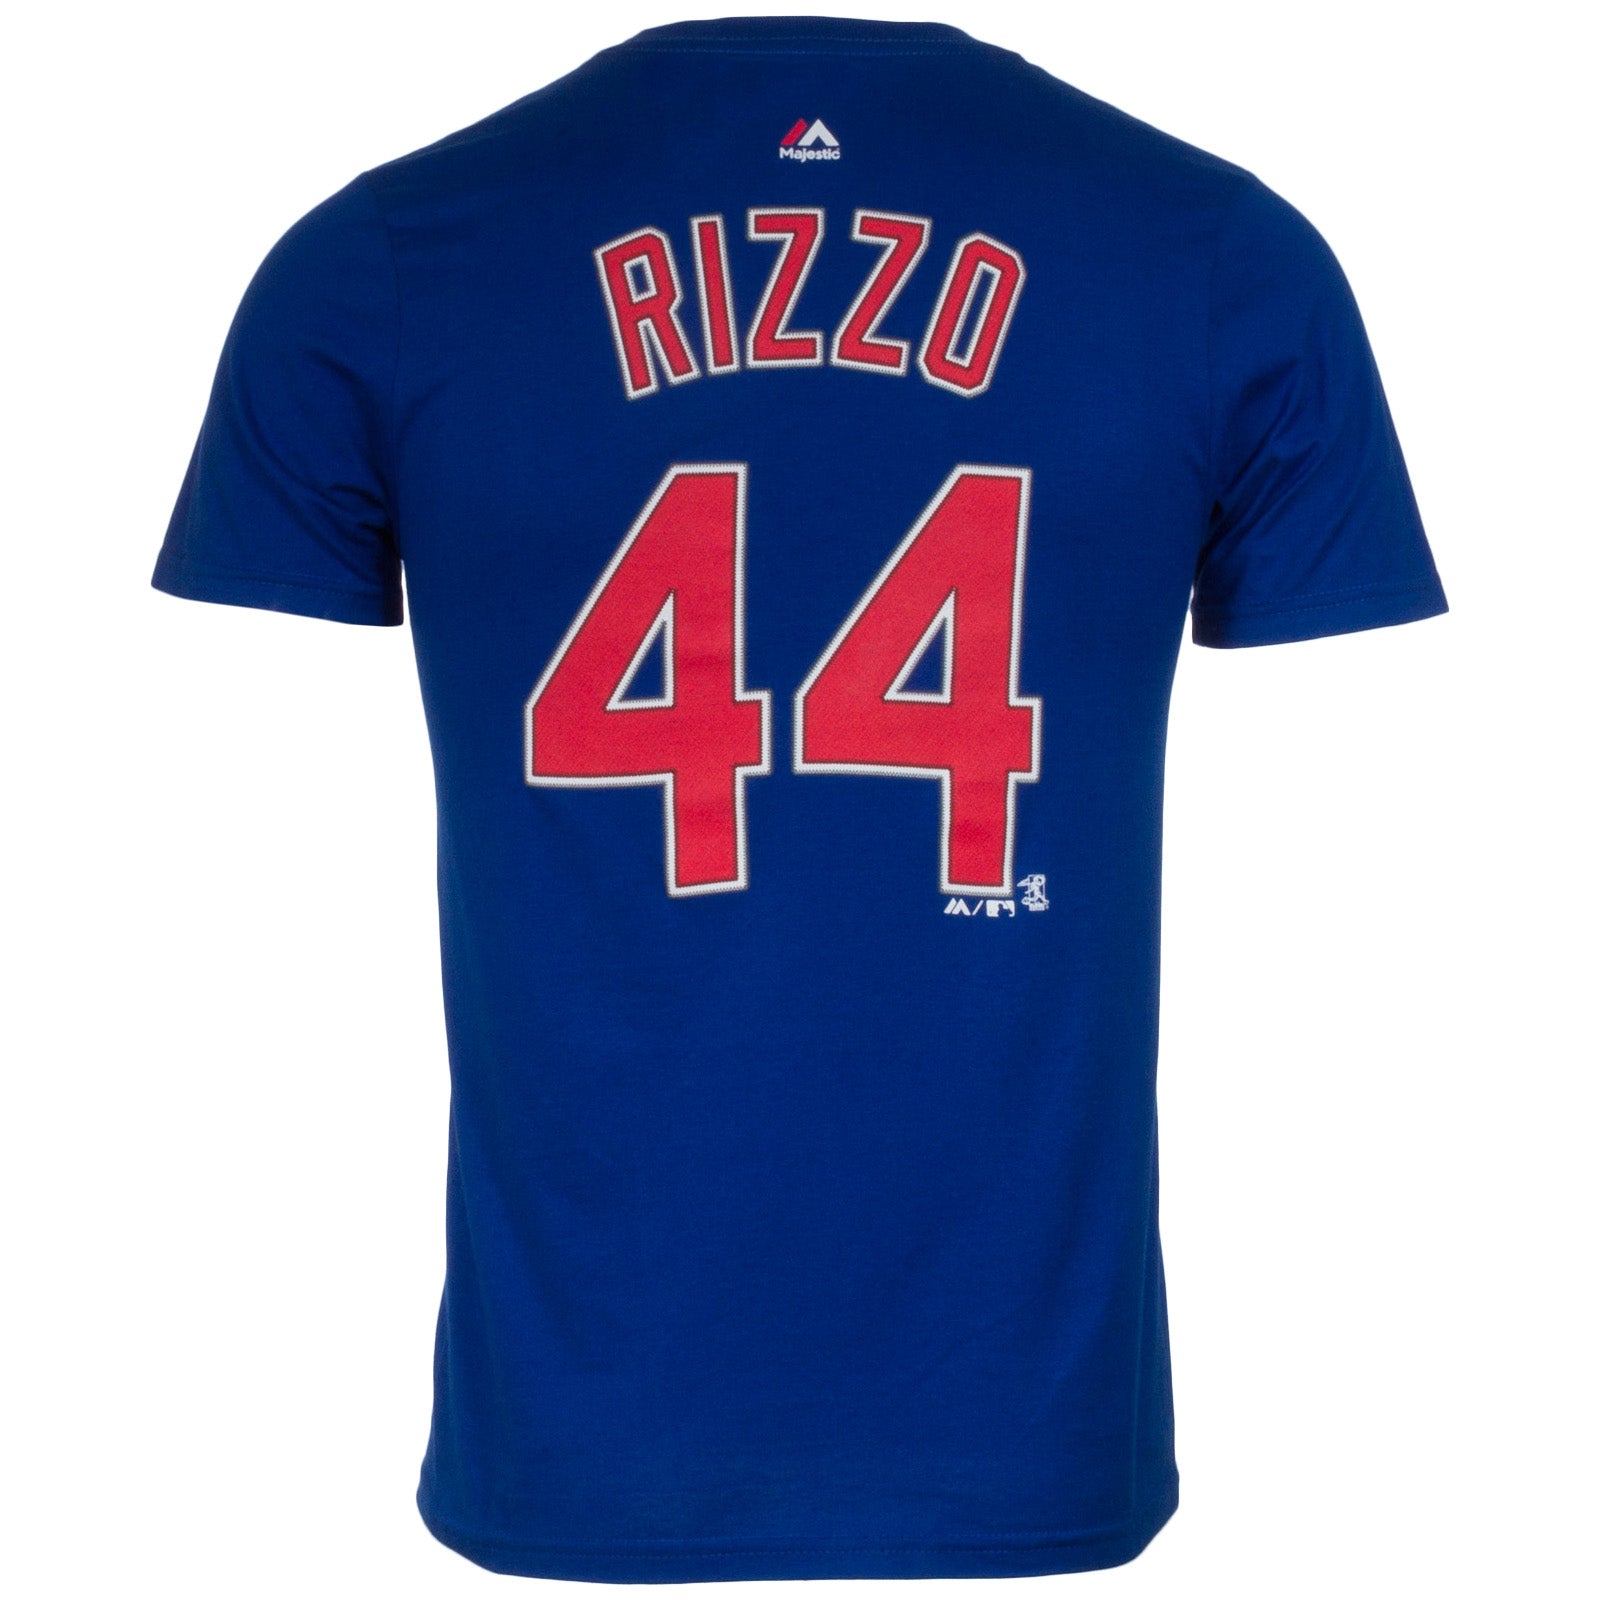 anthony rizzo youth jersey